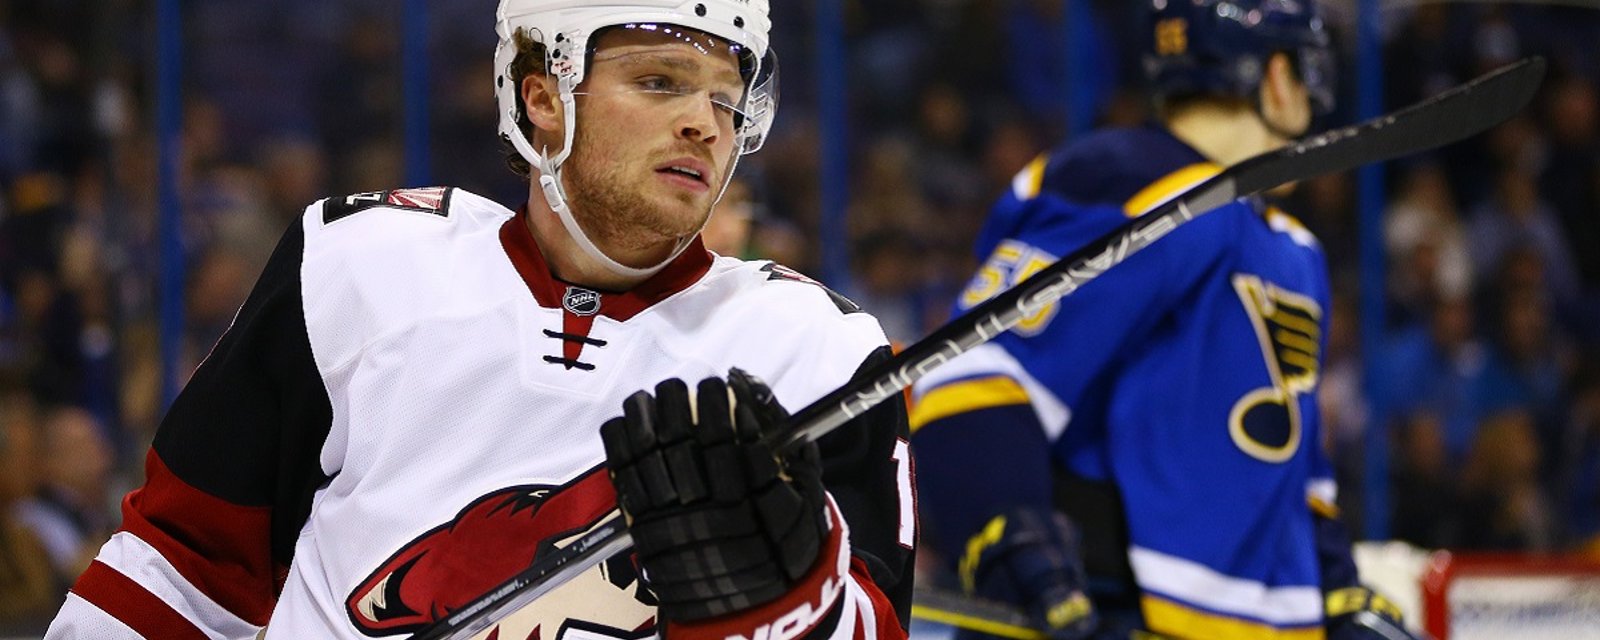 Report: Max Domi to miss significant time after injuring his hand in a fight.